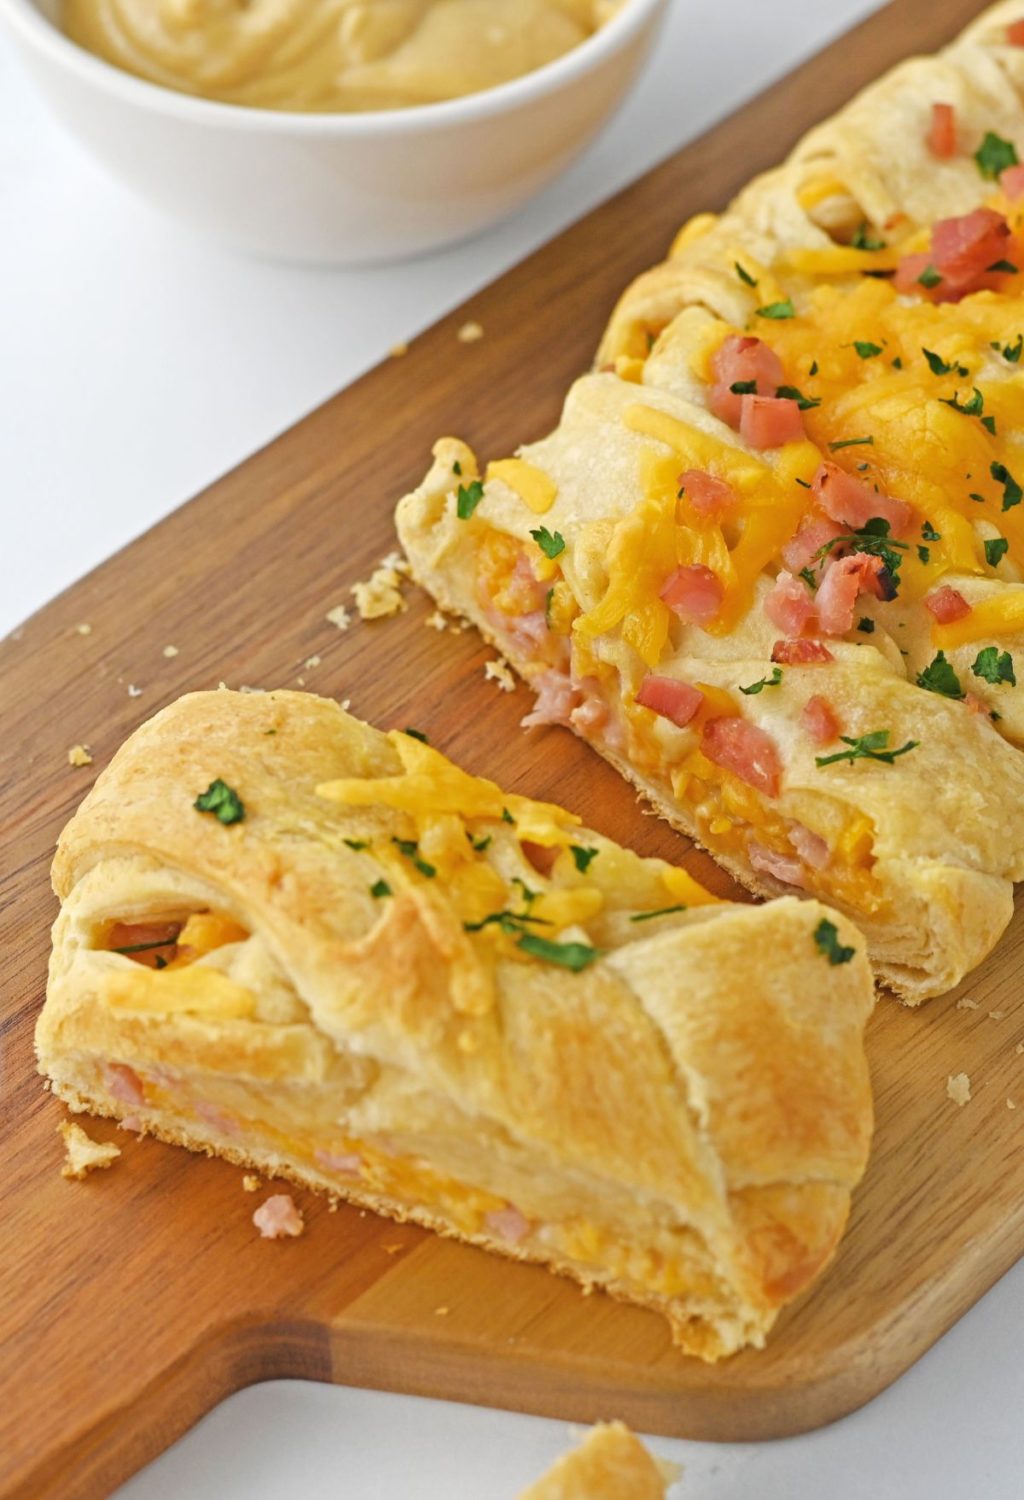 Ham and cheese crescent rolls on a cutting board.